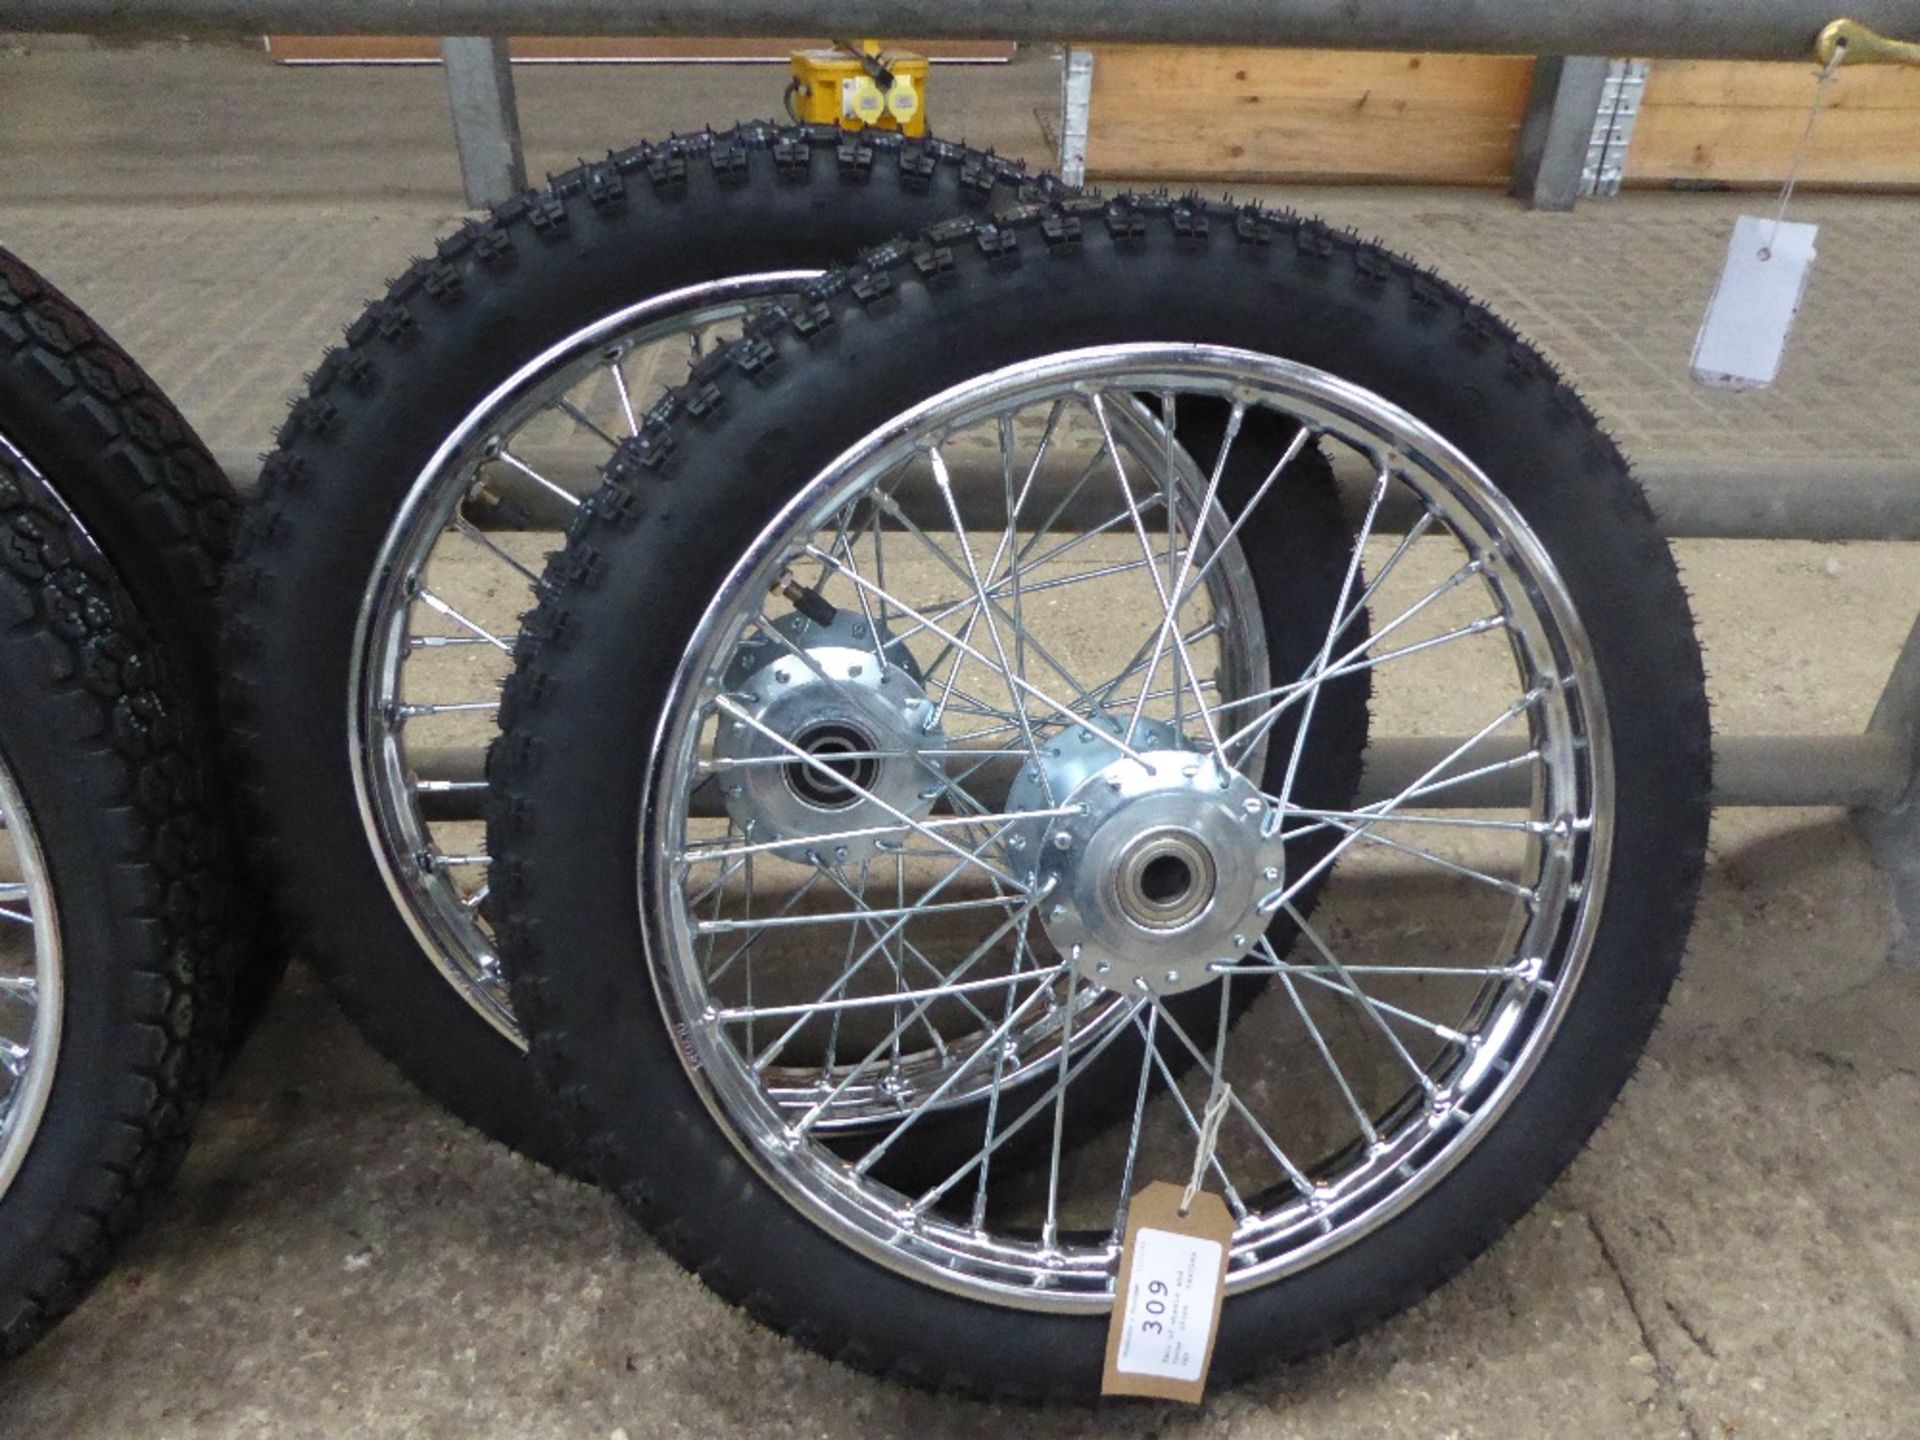 Pair of wire wheels and tyres, 16ins - carries VAT